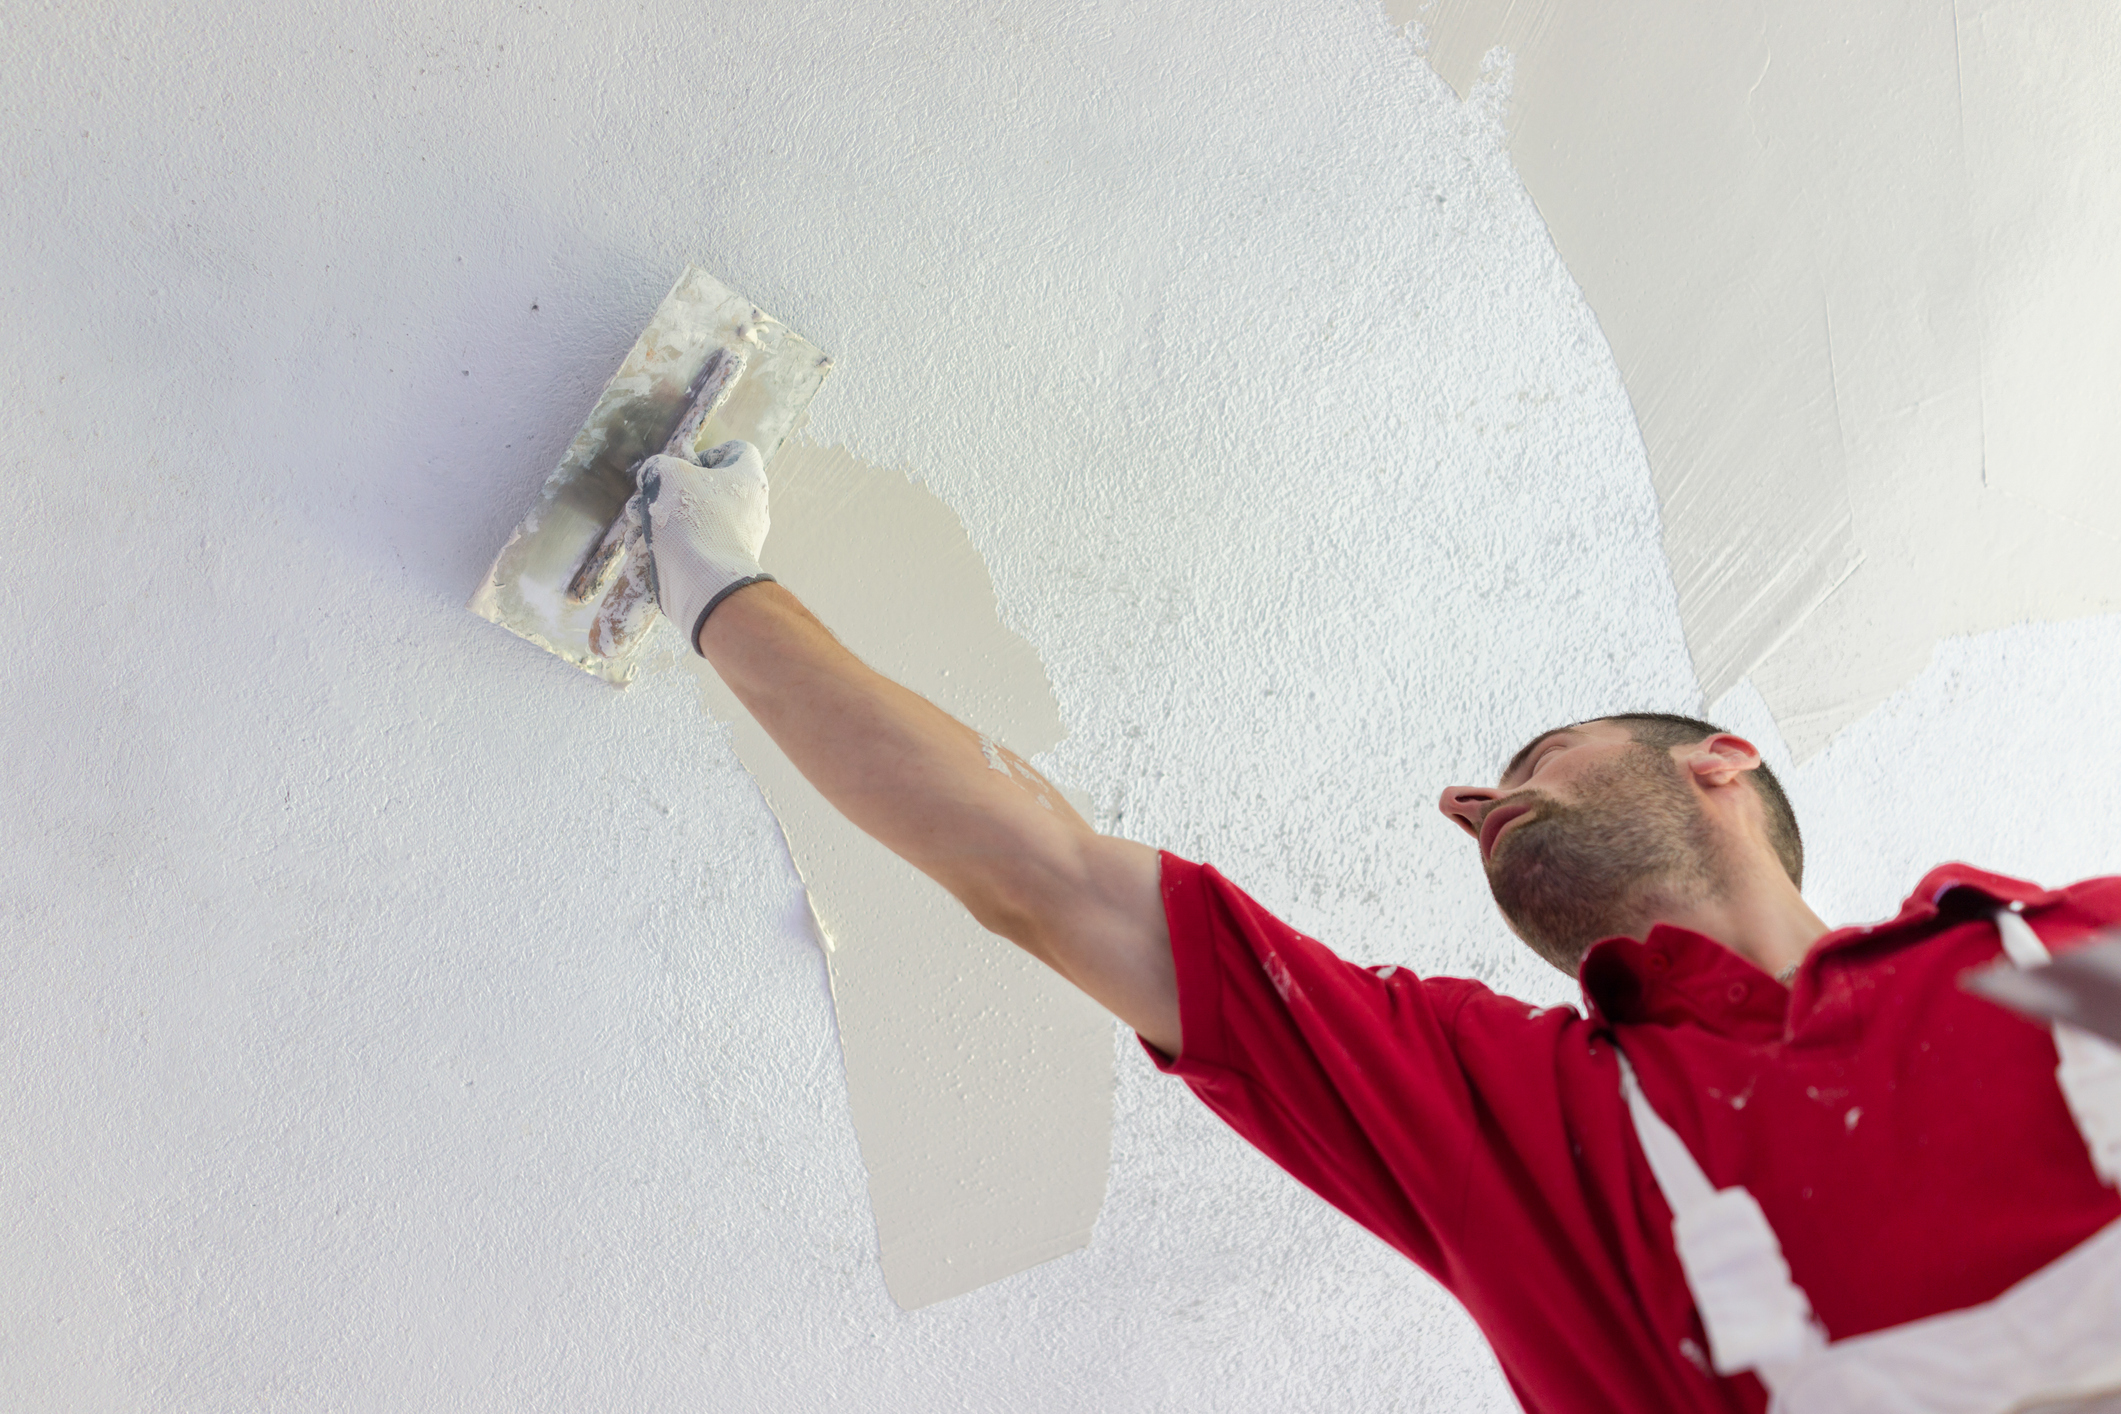 How to plaster a ceiling: an expert guide